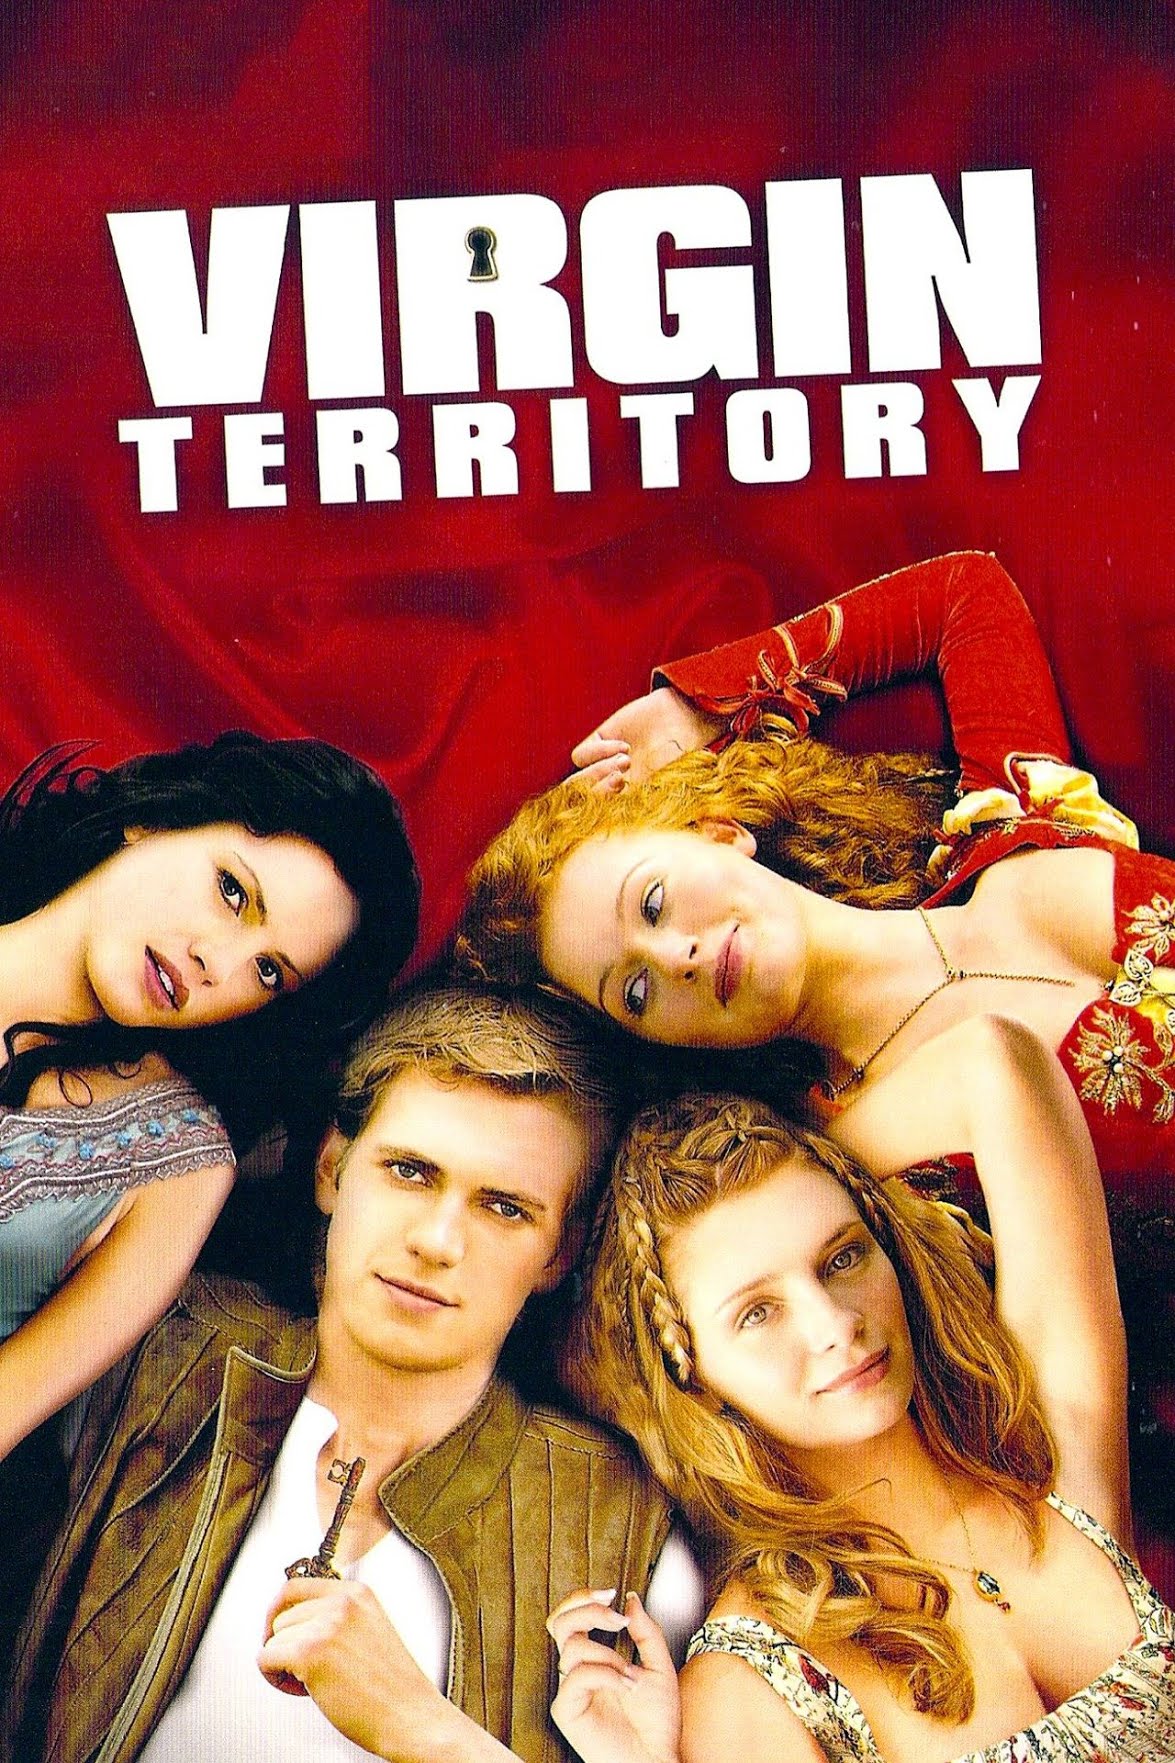 Download [18+] Virgin Territory (2007) UNRATED English Film 480p | 720p | 1080p WEB-DL